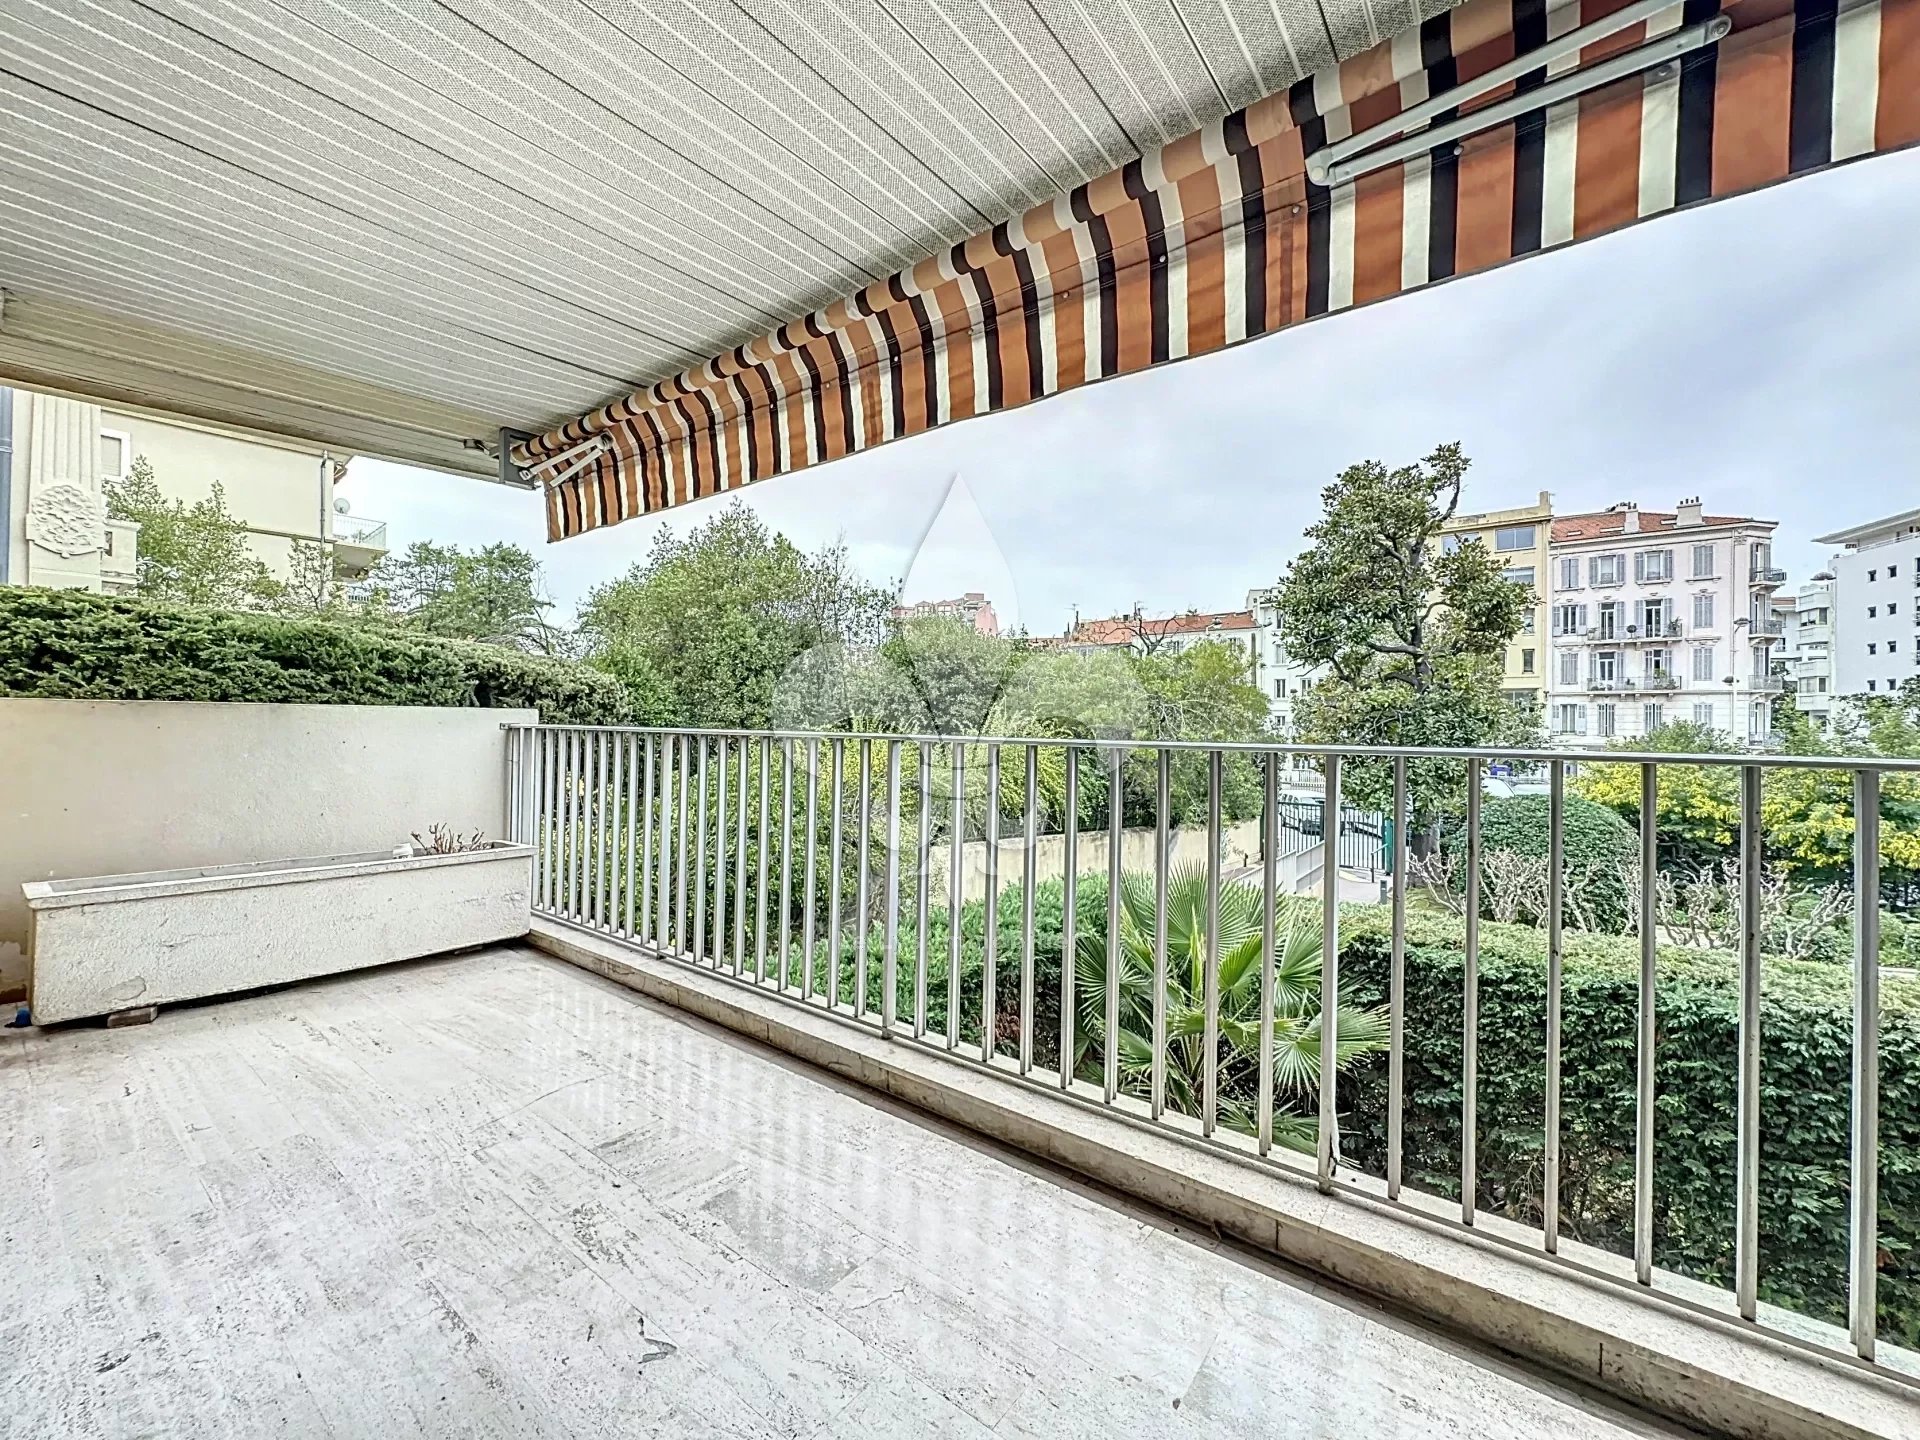 Cannes - Montfleury: 3-room apartment with garage